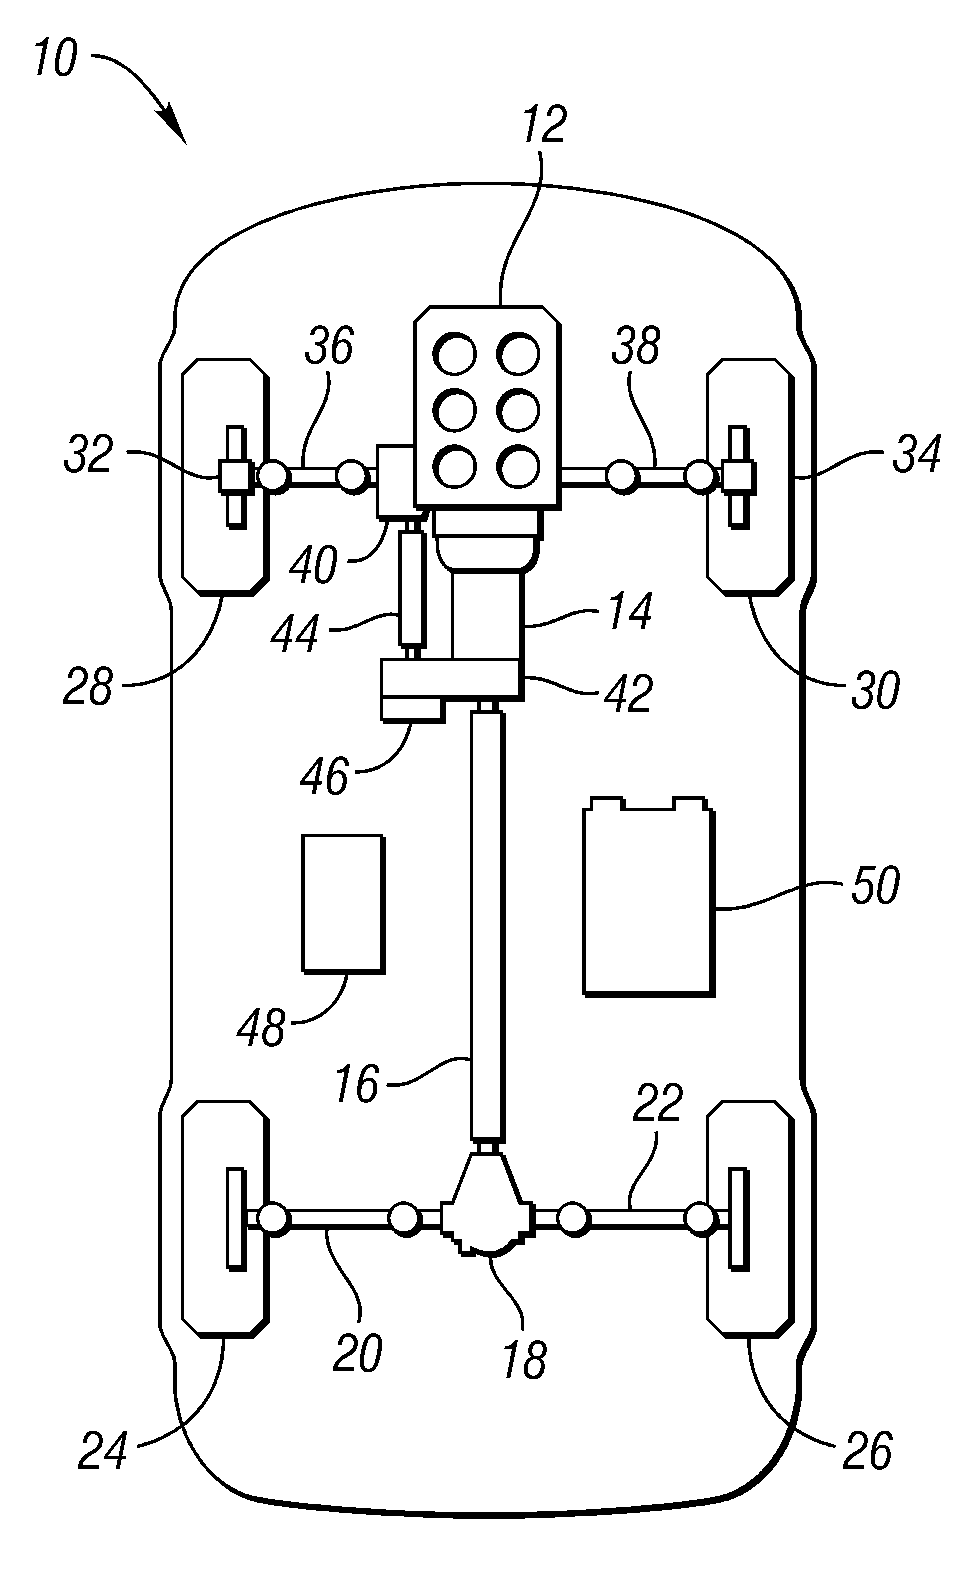 System and method for managing a powertrain in a vehicle